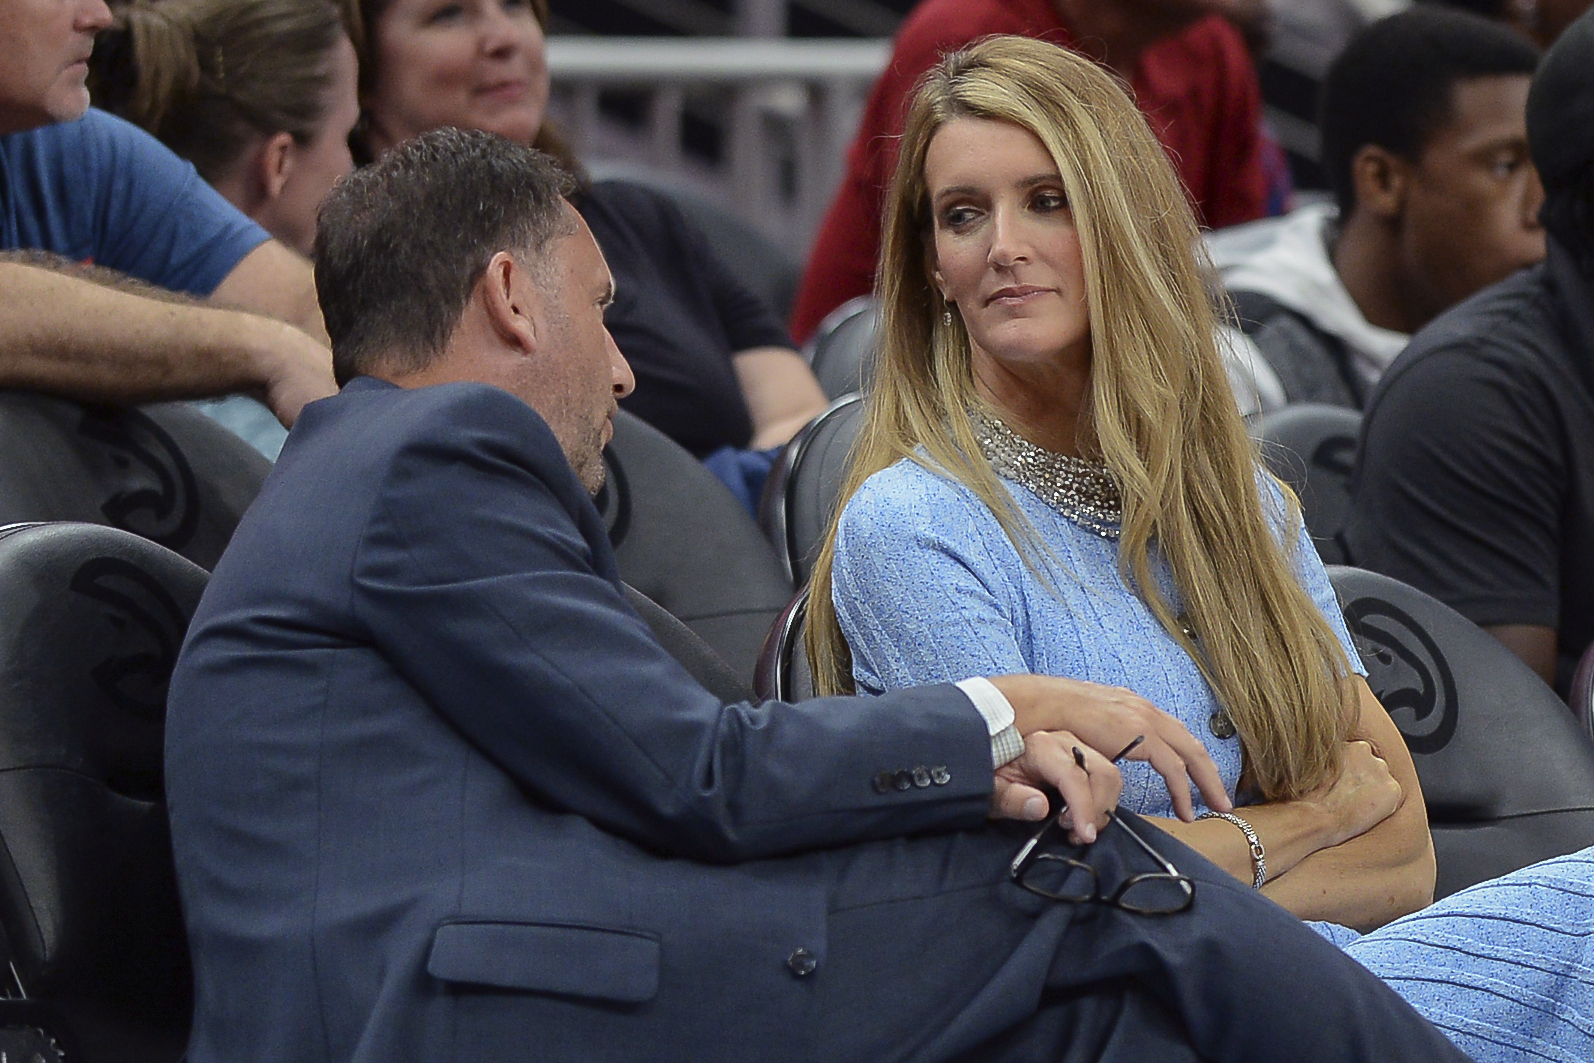 PHOTO: Kelly Loeffler, right, talks with Atlanta Dream General Manager Chris Sienko, left, during the WNBA game between the Las Vegas Aces and the Atlanta Dream on Sept. 5th, 2019, in Atlanta, Ga.